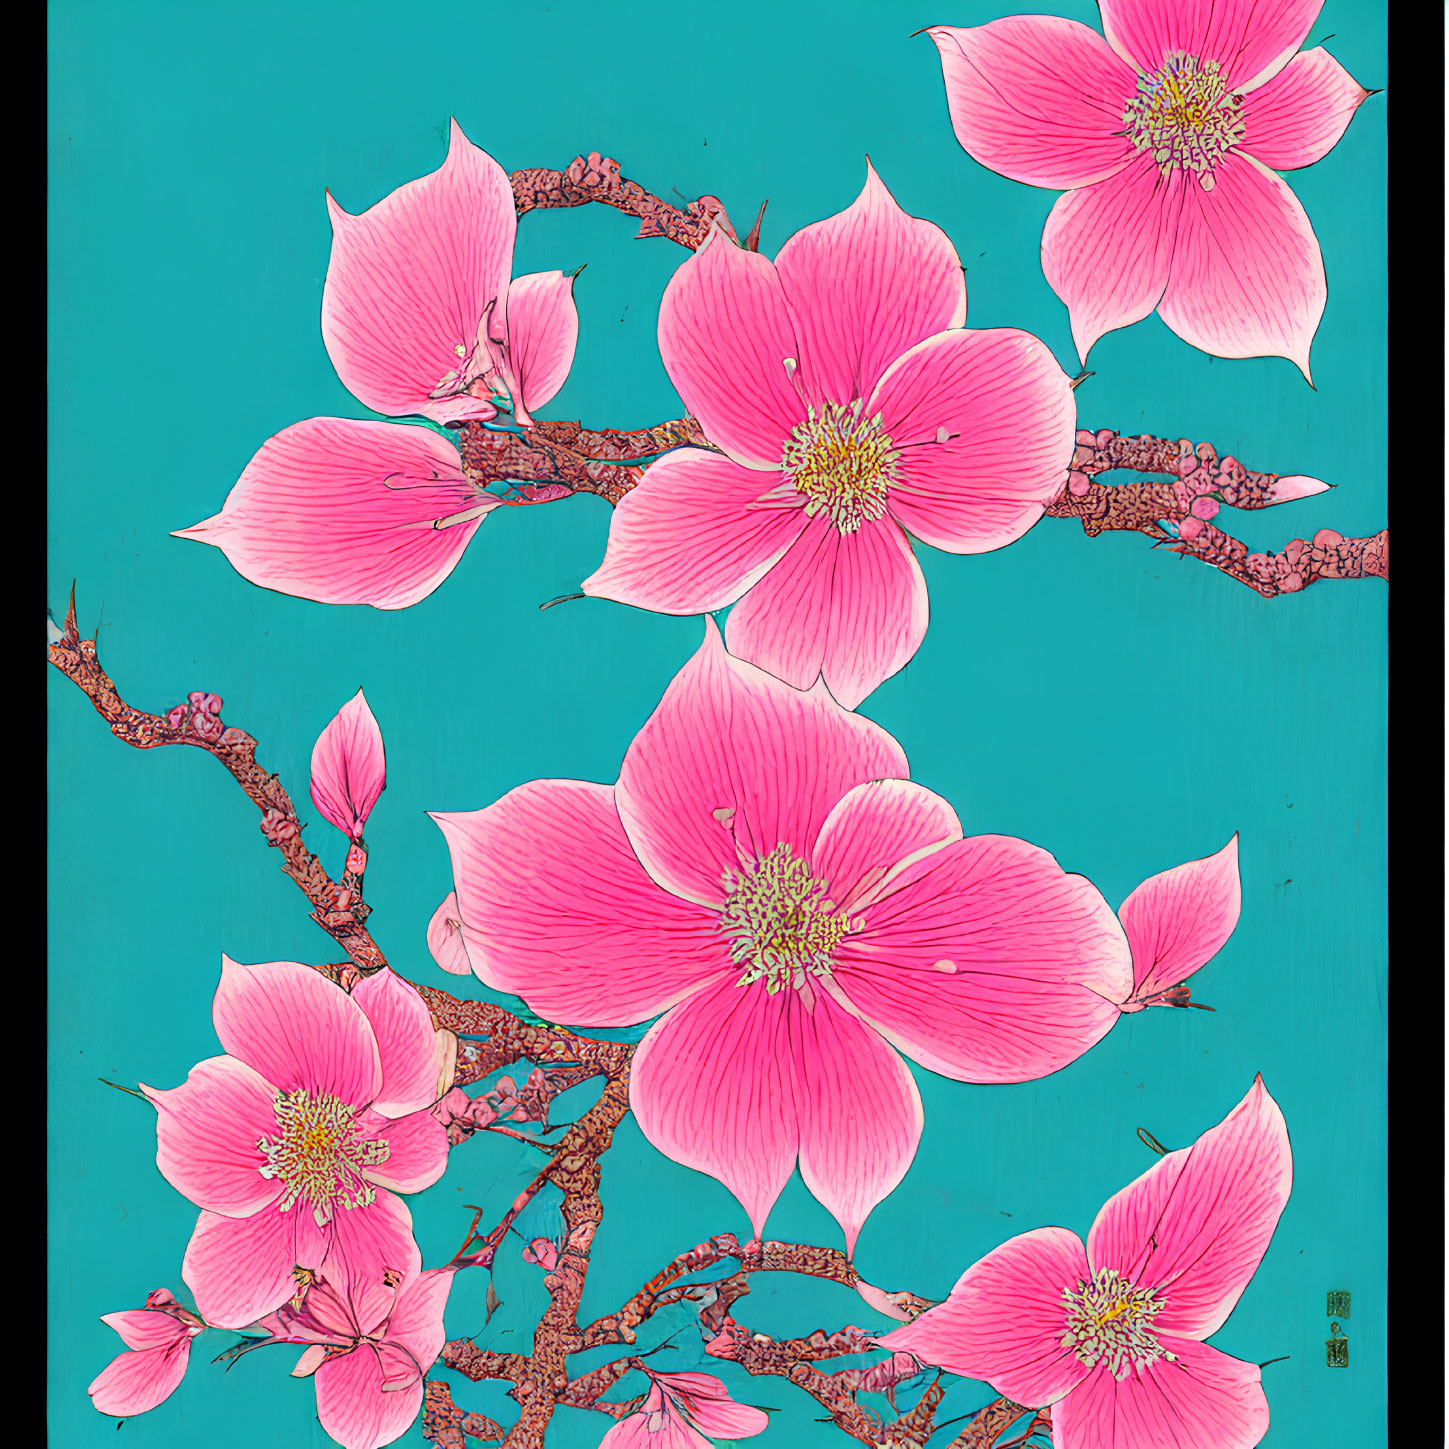 Vibrant pink blossoms on brown branches against teal backdrop